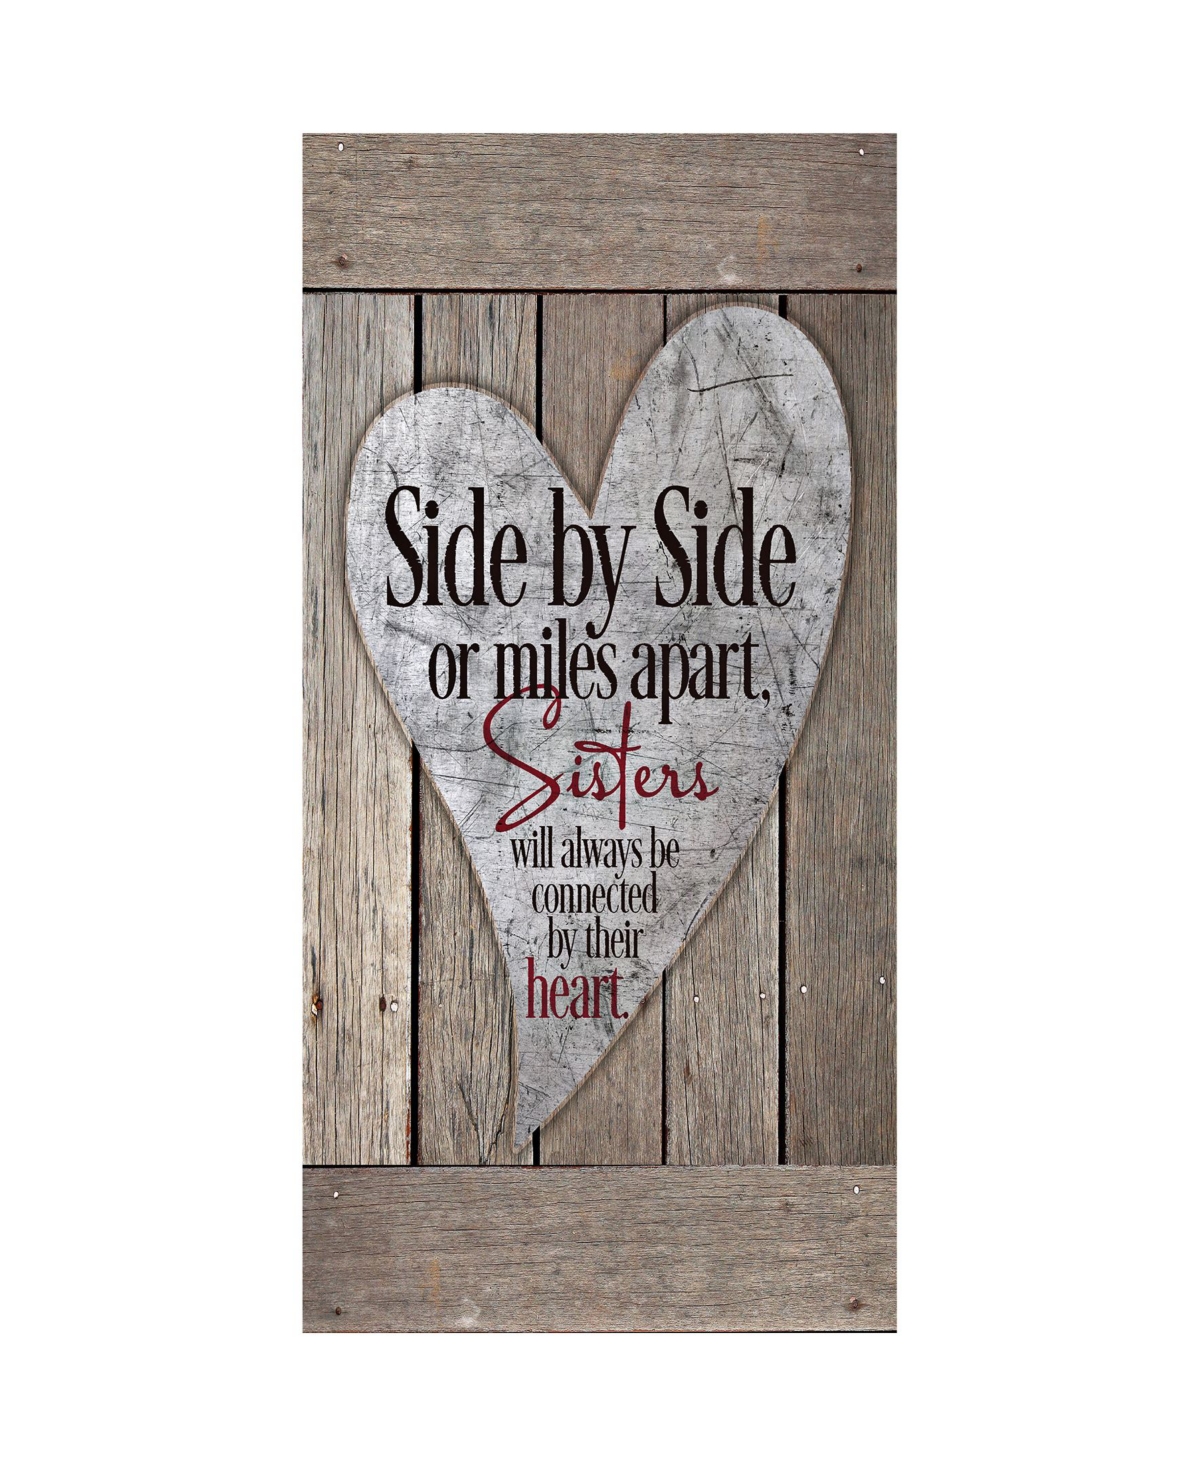 Dexsa Side by Side or Miles Apart, Sisters Timberland Wood Plaque, 6.75